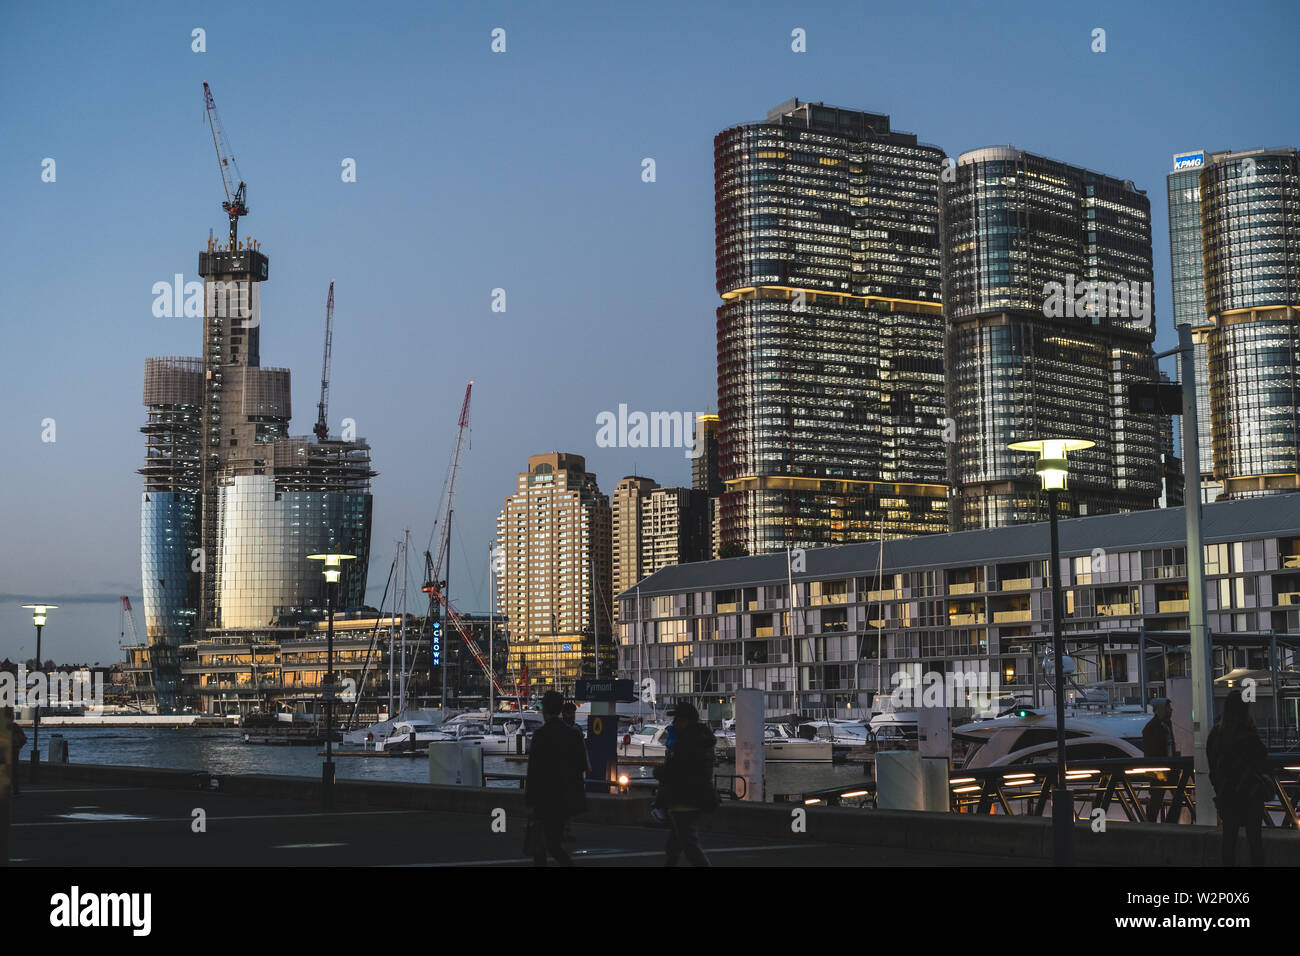 Pyrmont, New South Wales - JUNE 28th, 2019: Progress image of the new Star Casino being built at Barangaroo, Sydney. Shot just after sunset at dusk. Stock Photo